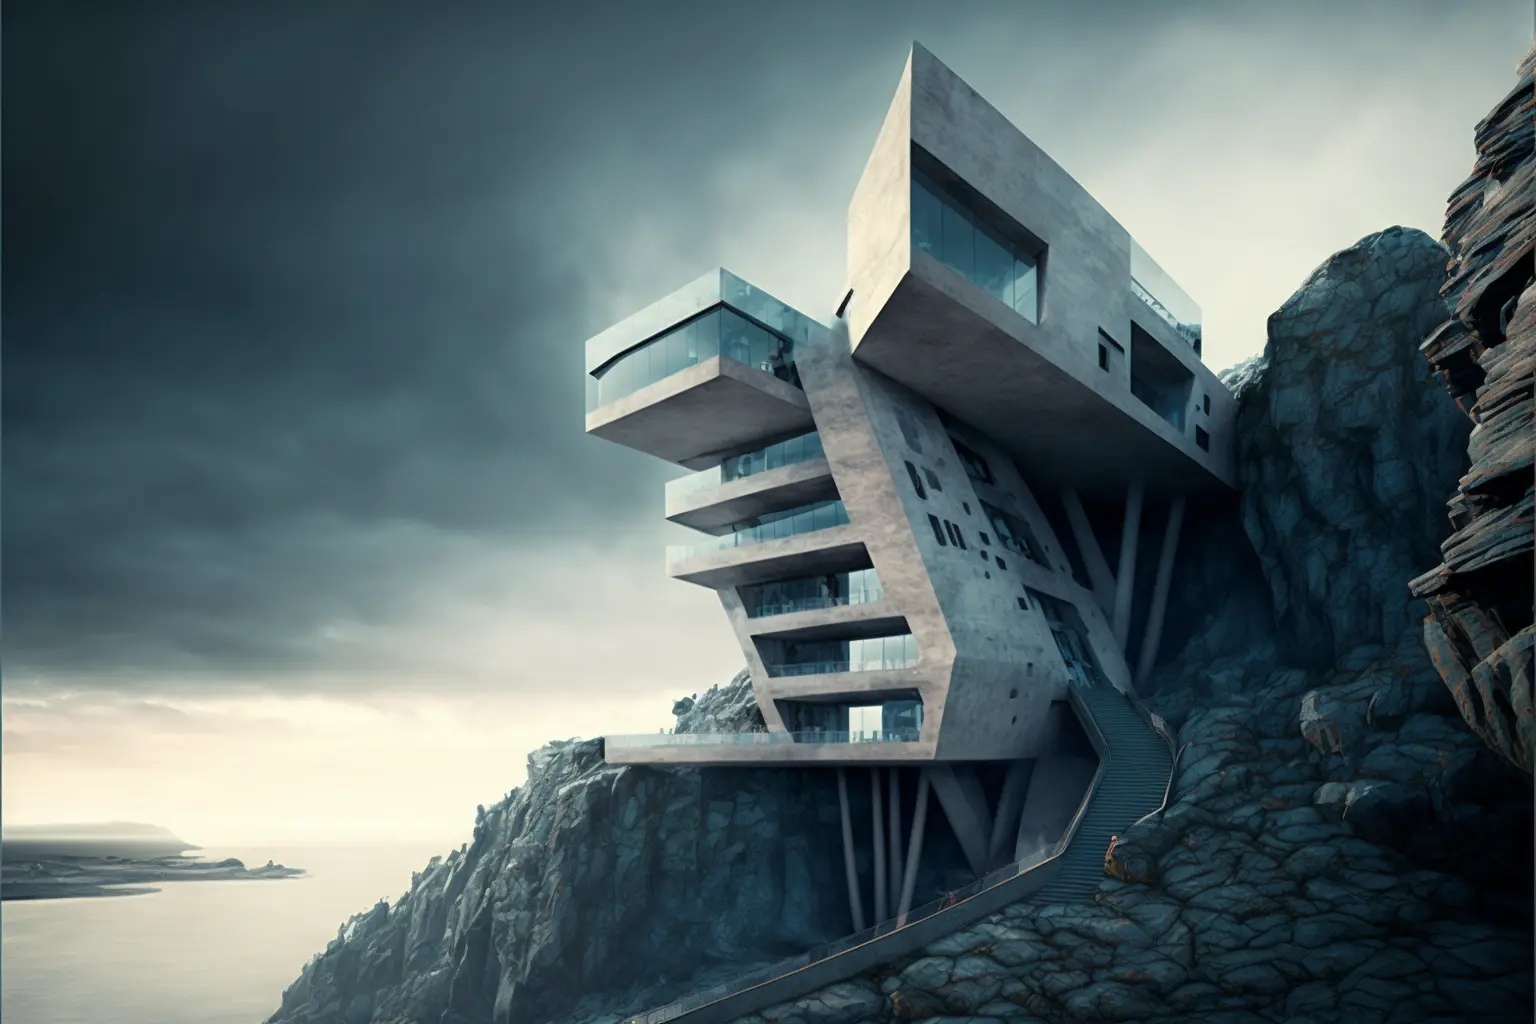 hotel designed by Ando Tadao, organic, embed into cliffside, architectural photography, style of archillect, futurism, modernist architecture 